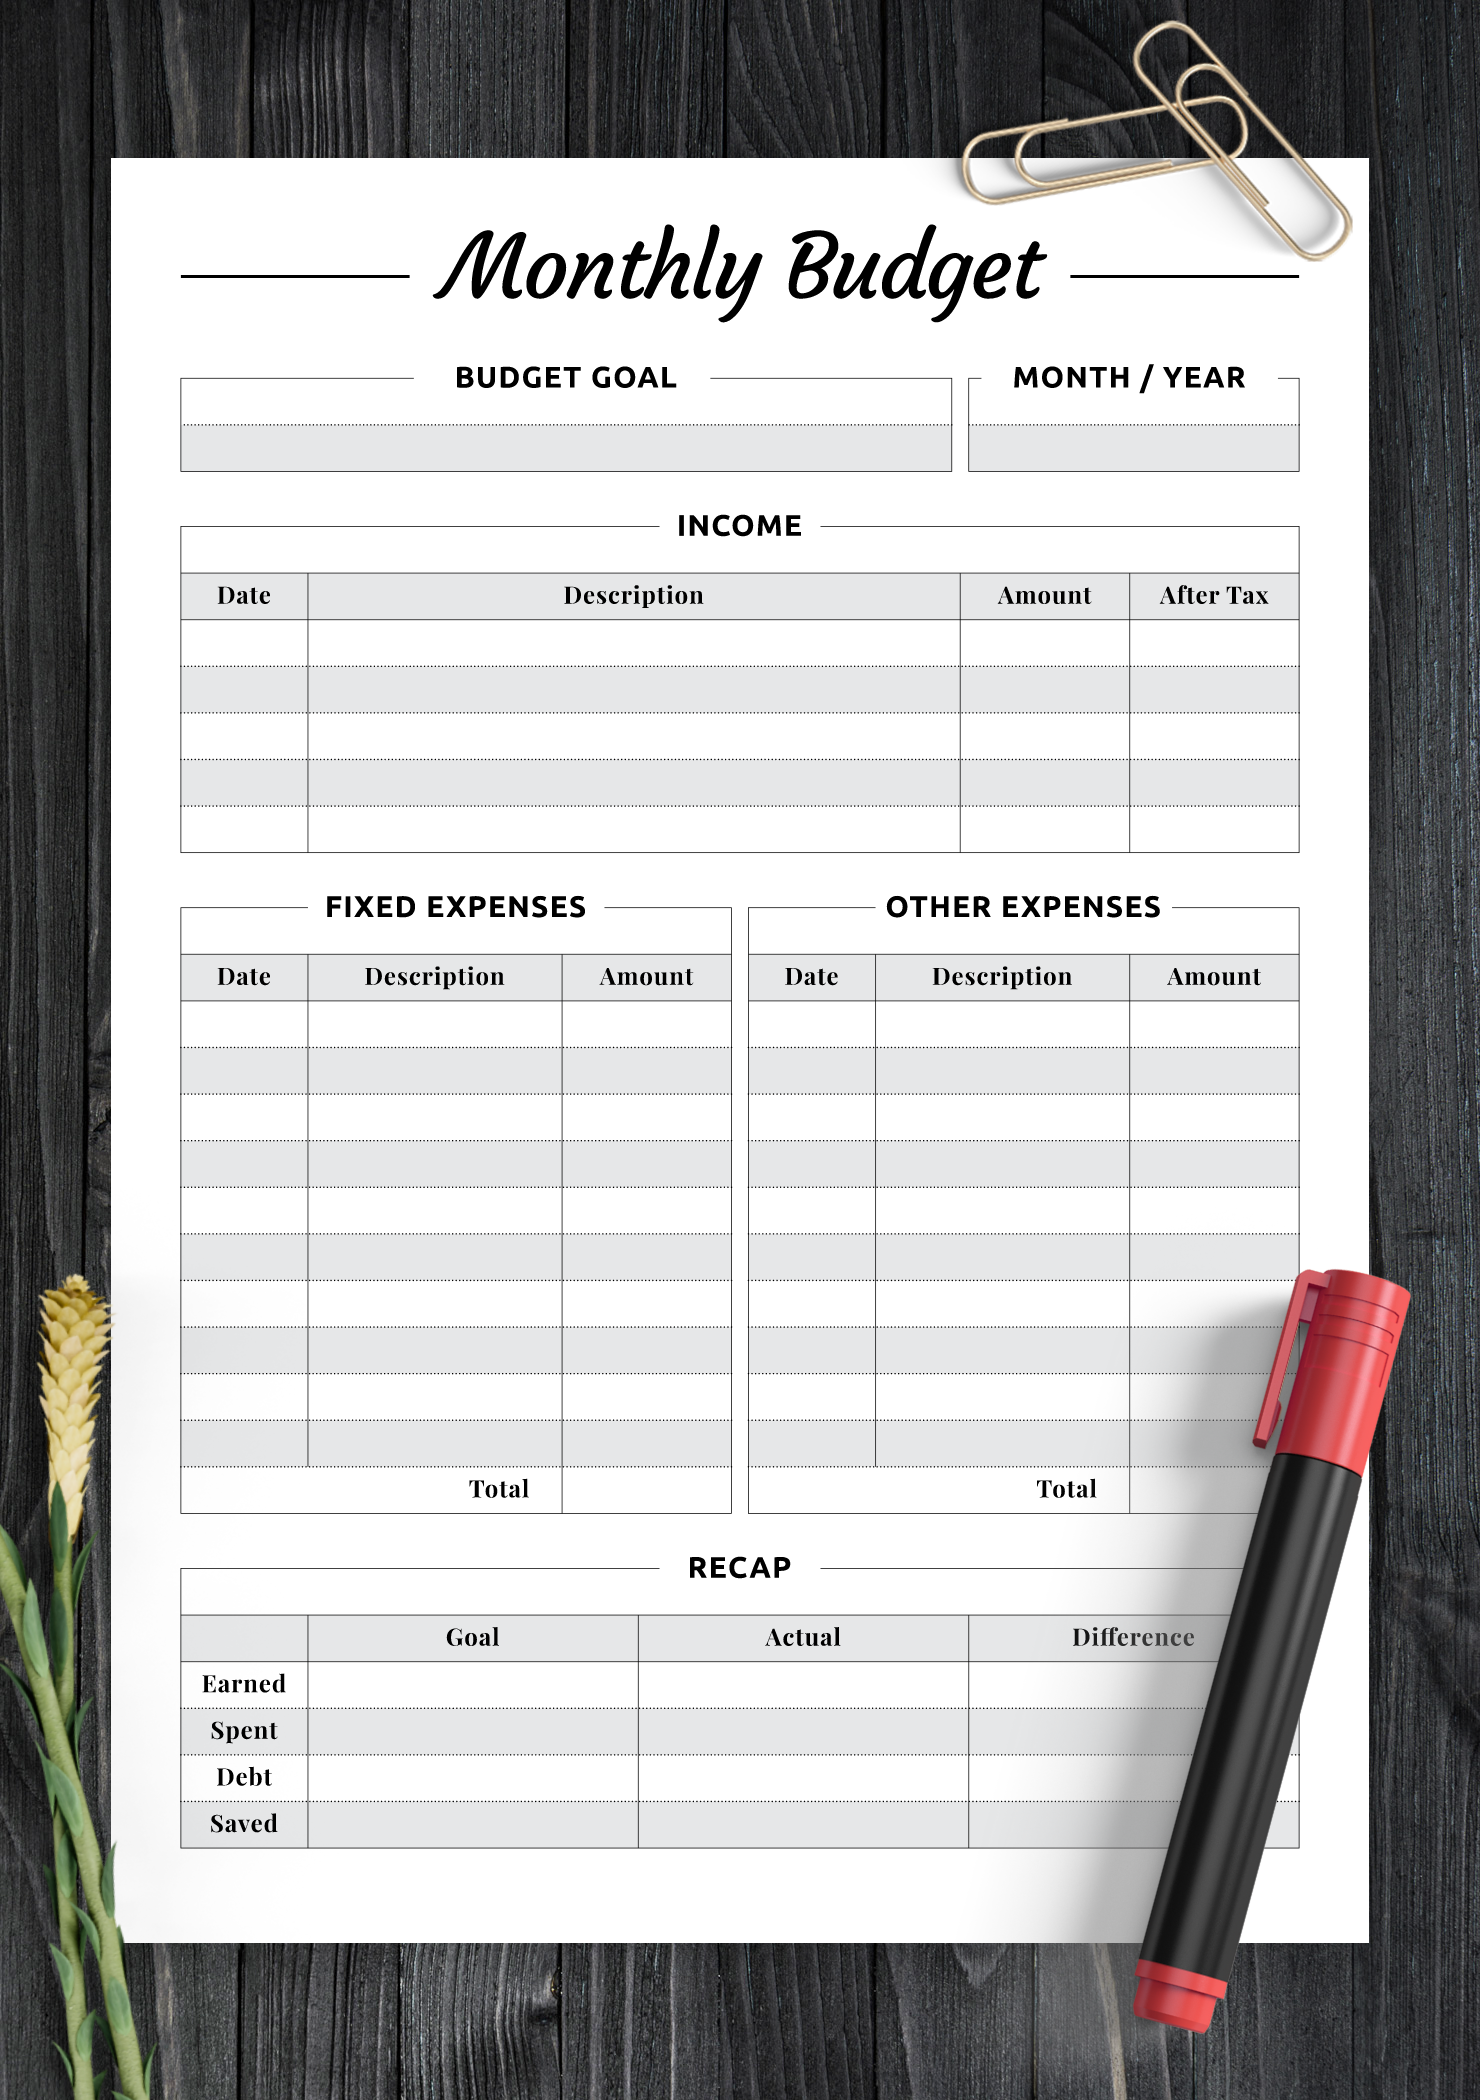 download-printable-monthly-budget-with-recap-section-pdf